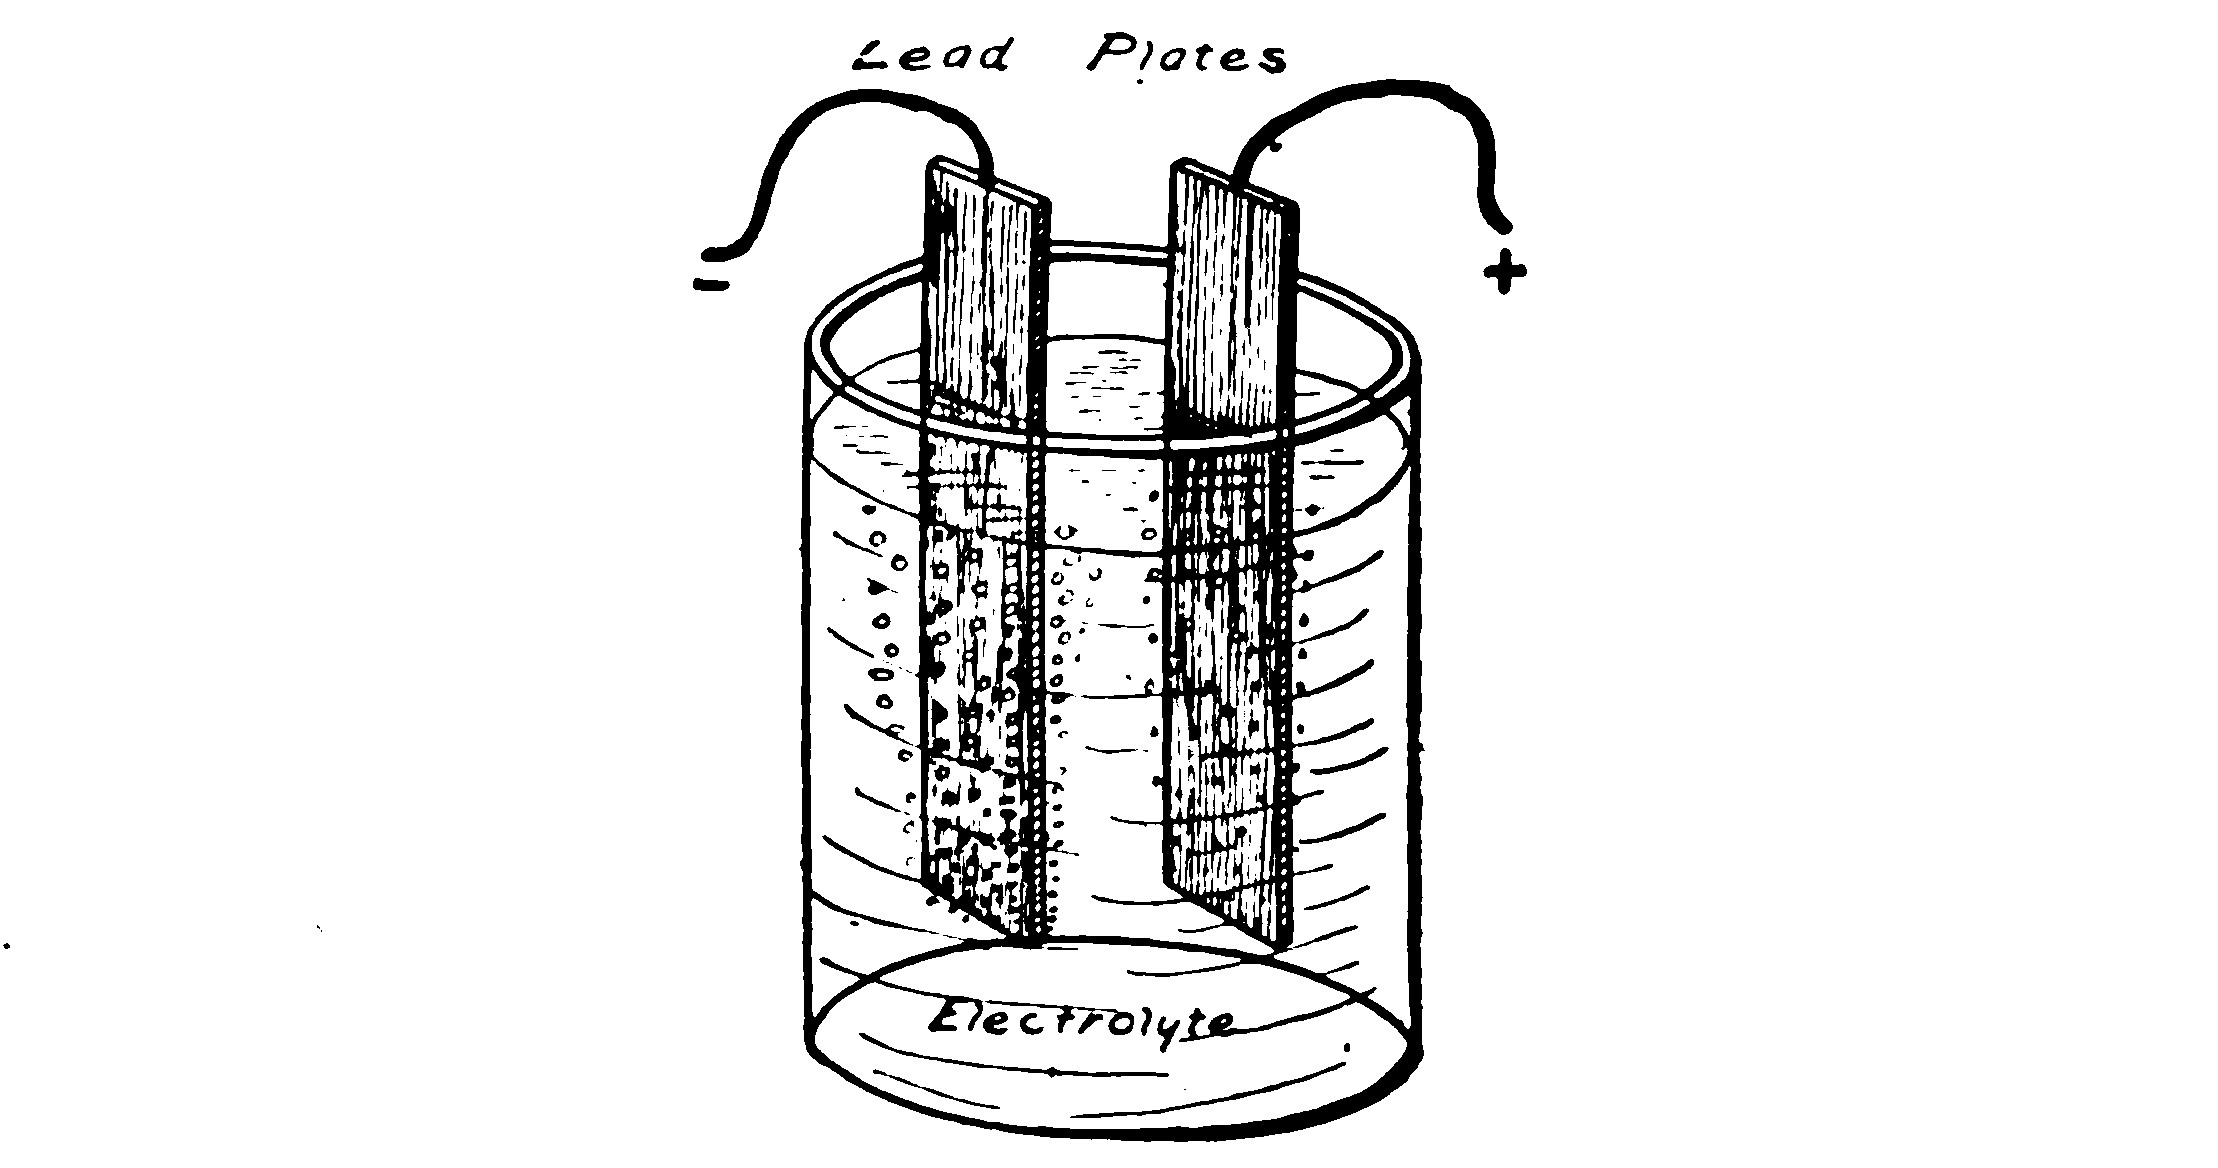 FIG. 37.—A Simple Experimental Storage Battery consisting of two Lead Plates immersed in Dilute Sulphuric Acid.